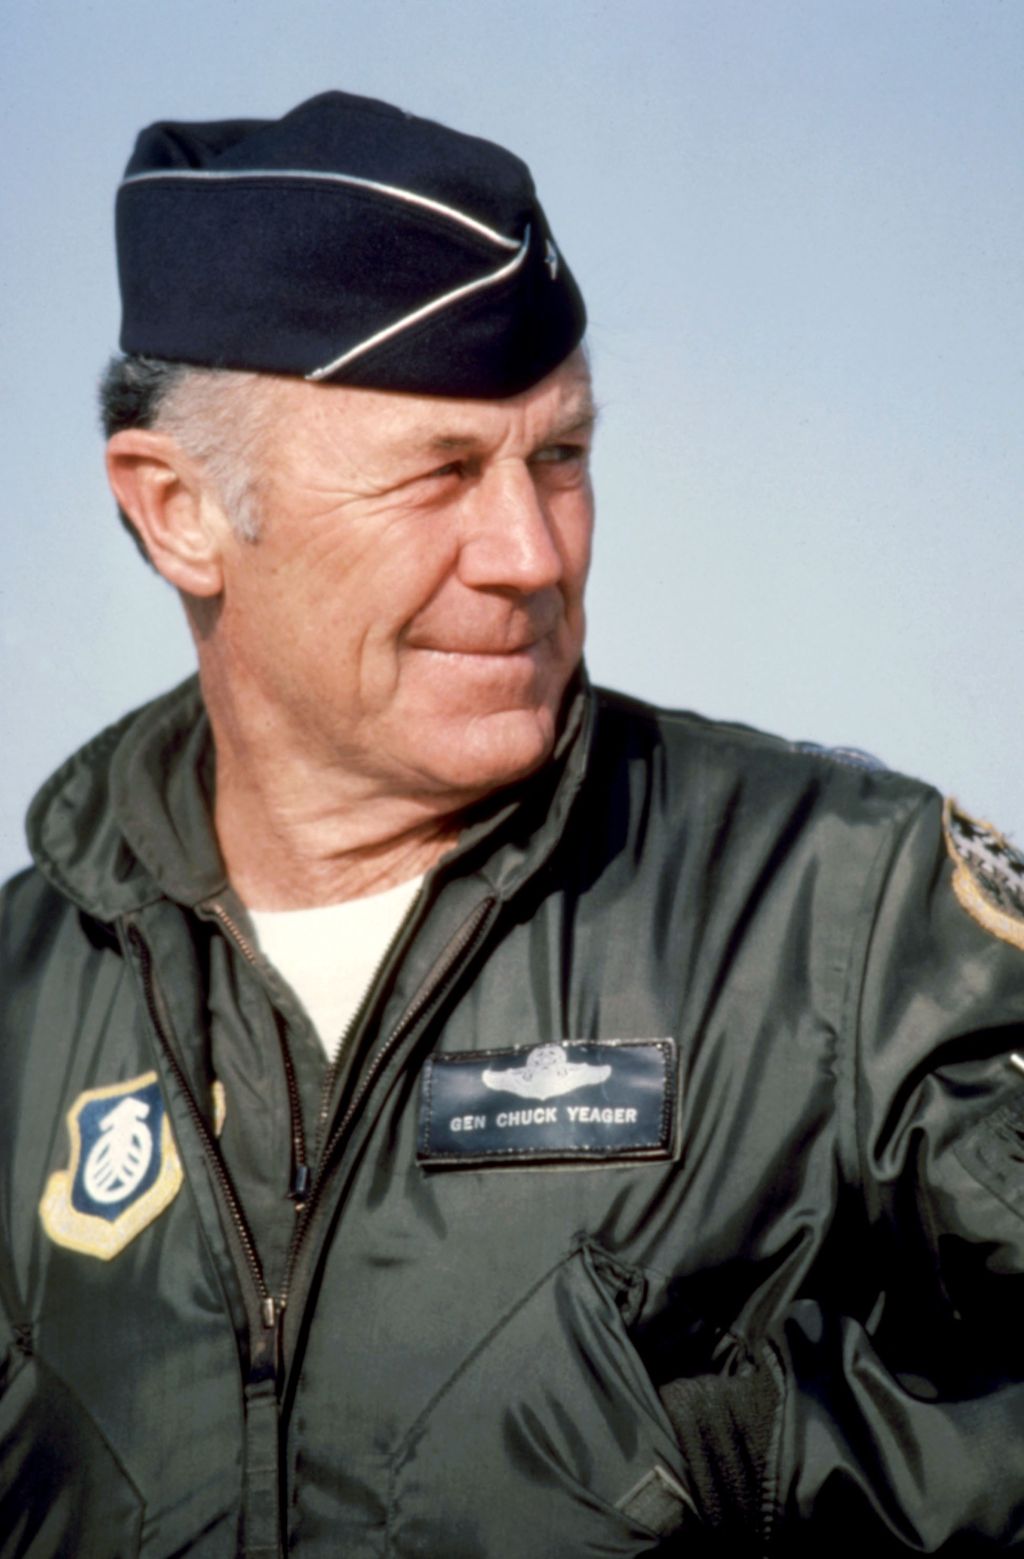 Legendary airman Chuck Yeager dead at 97